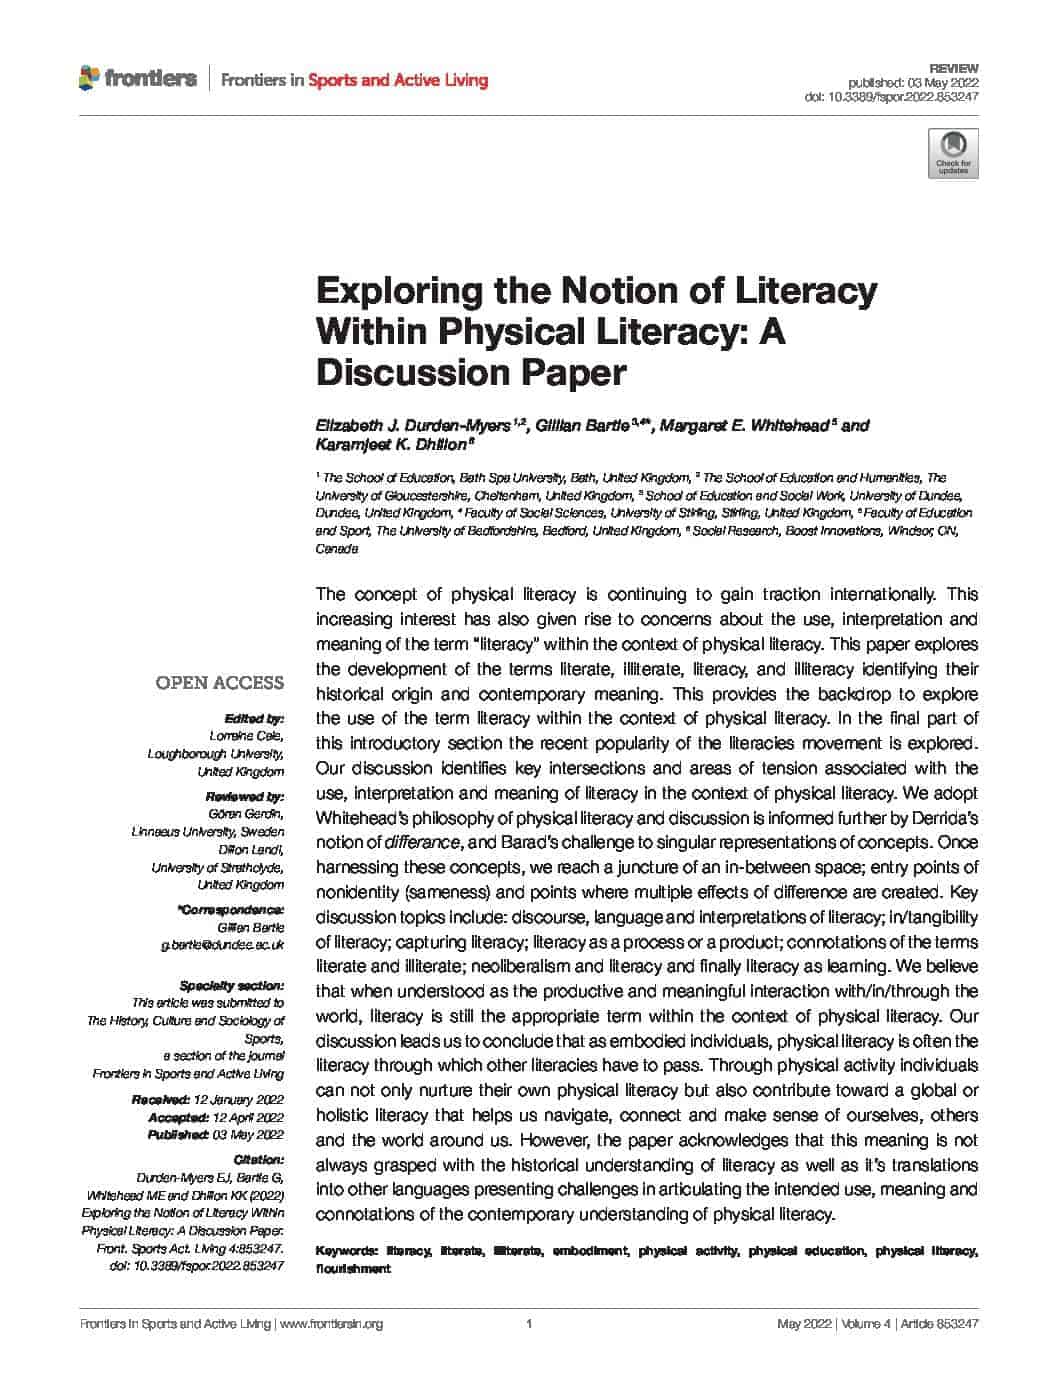 Exploring the Notion of Literacy Within Physical Literacy: A Discussion Paper